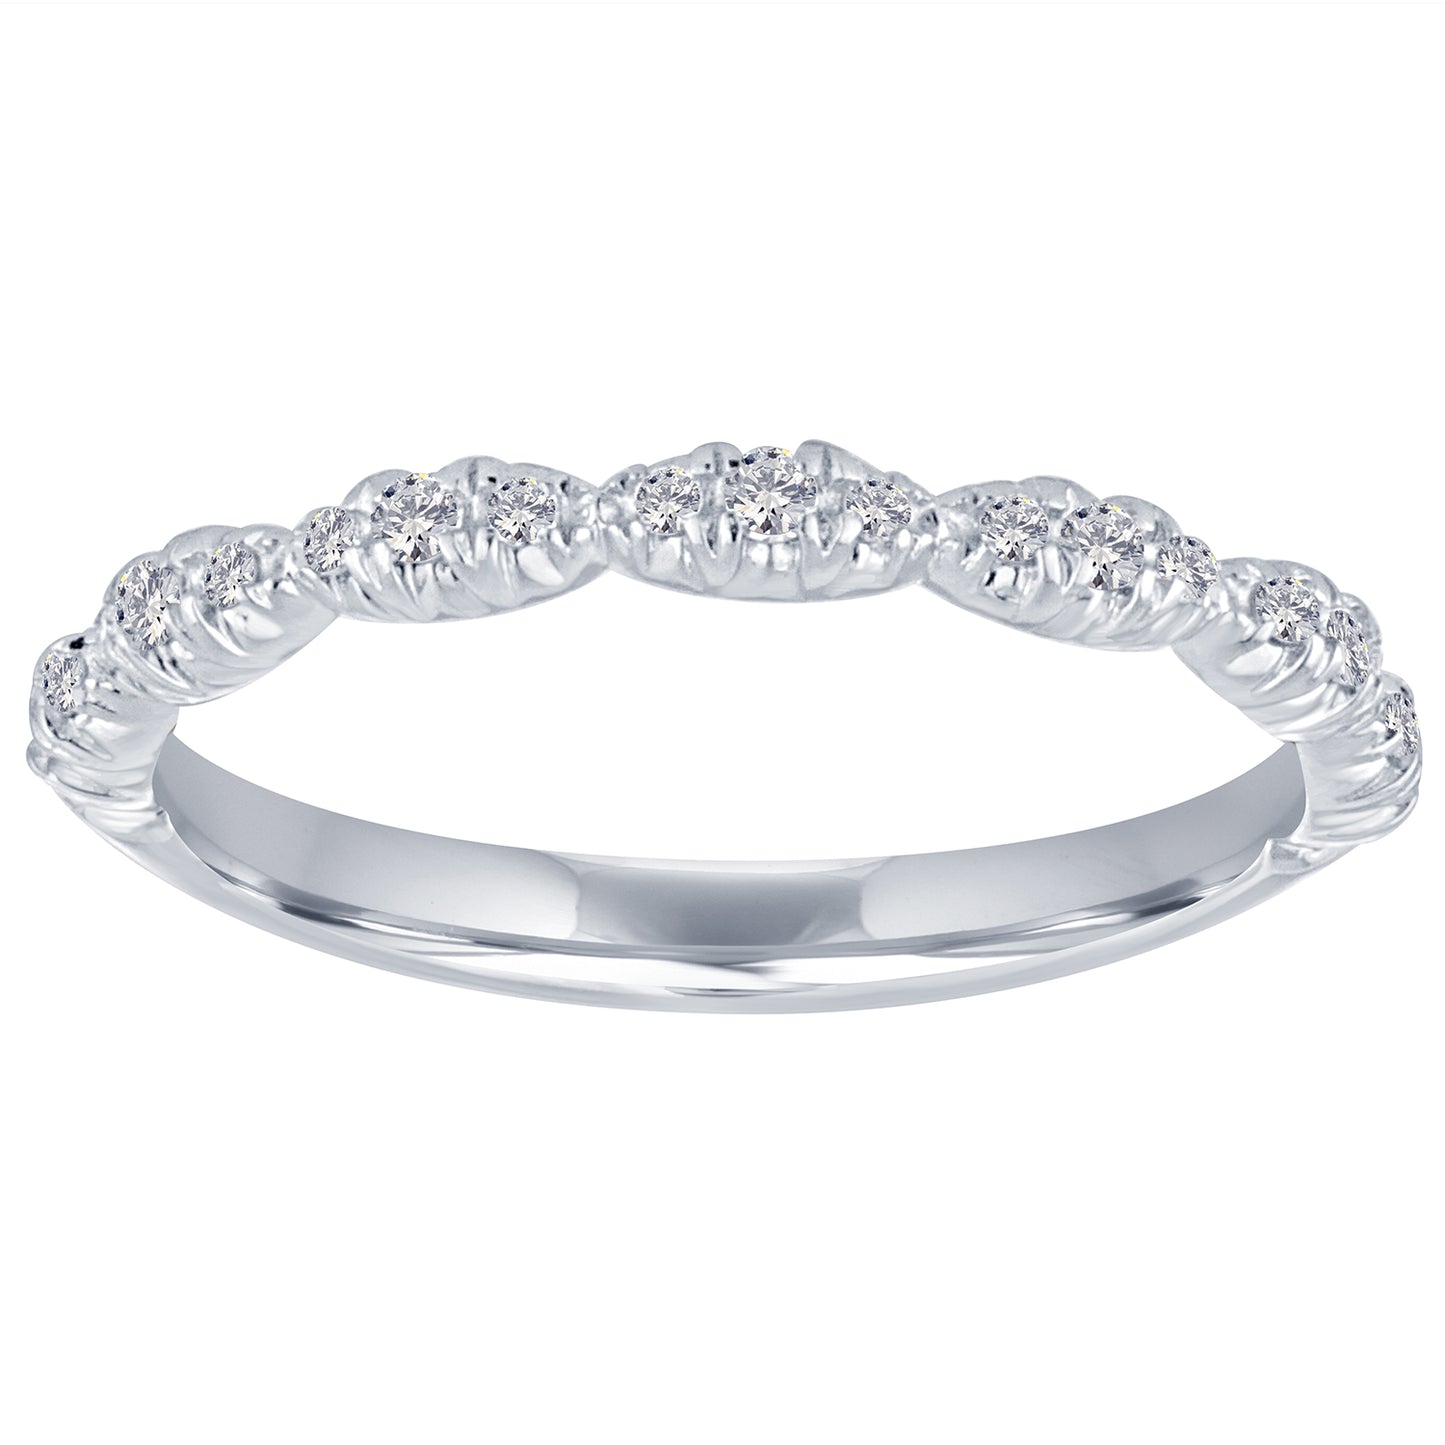 White gold skinny micro pave band with round diamonds. 